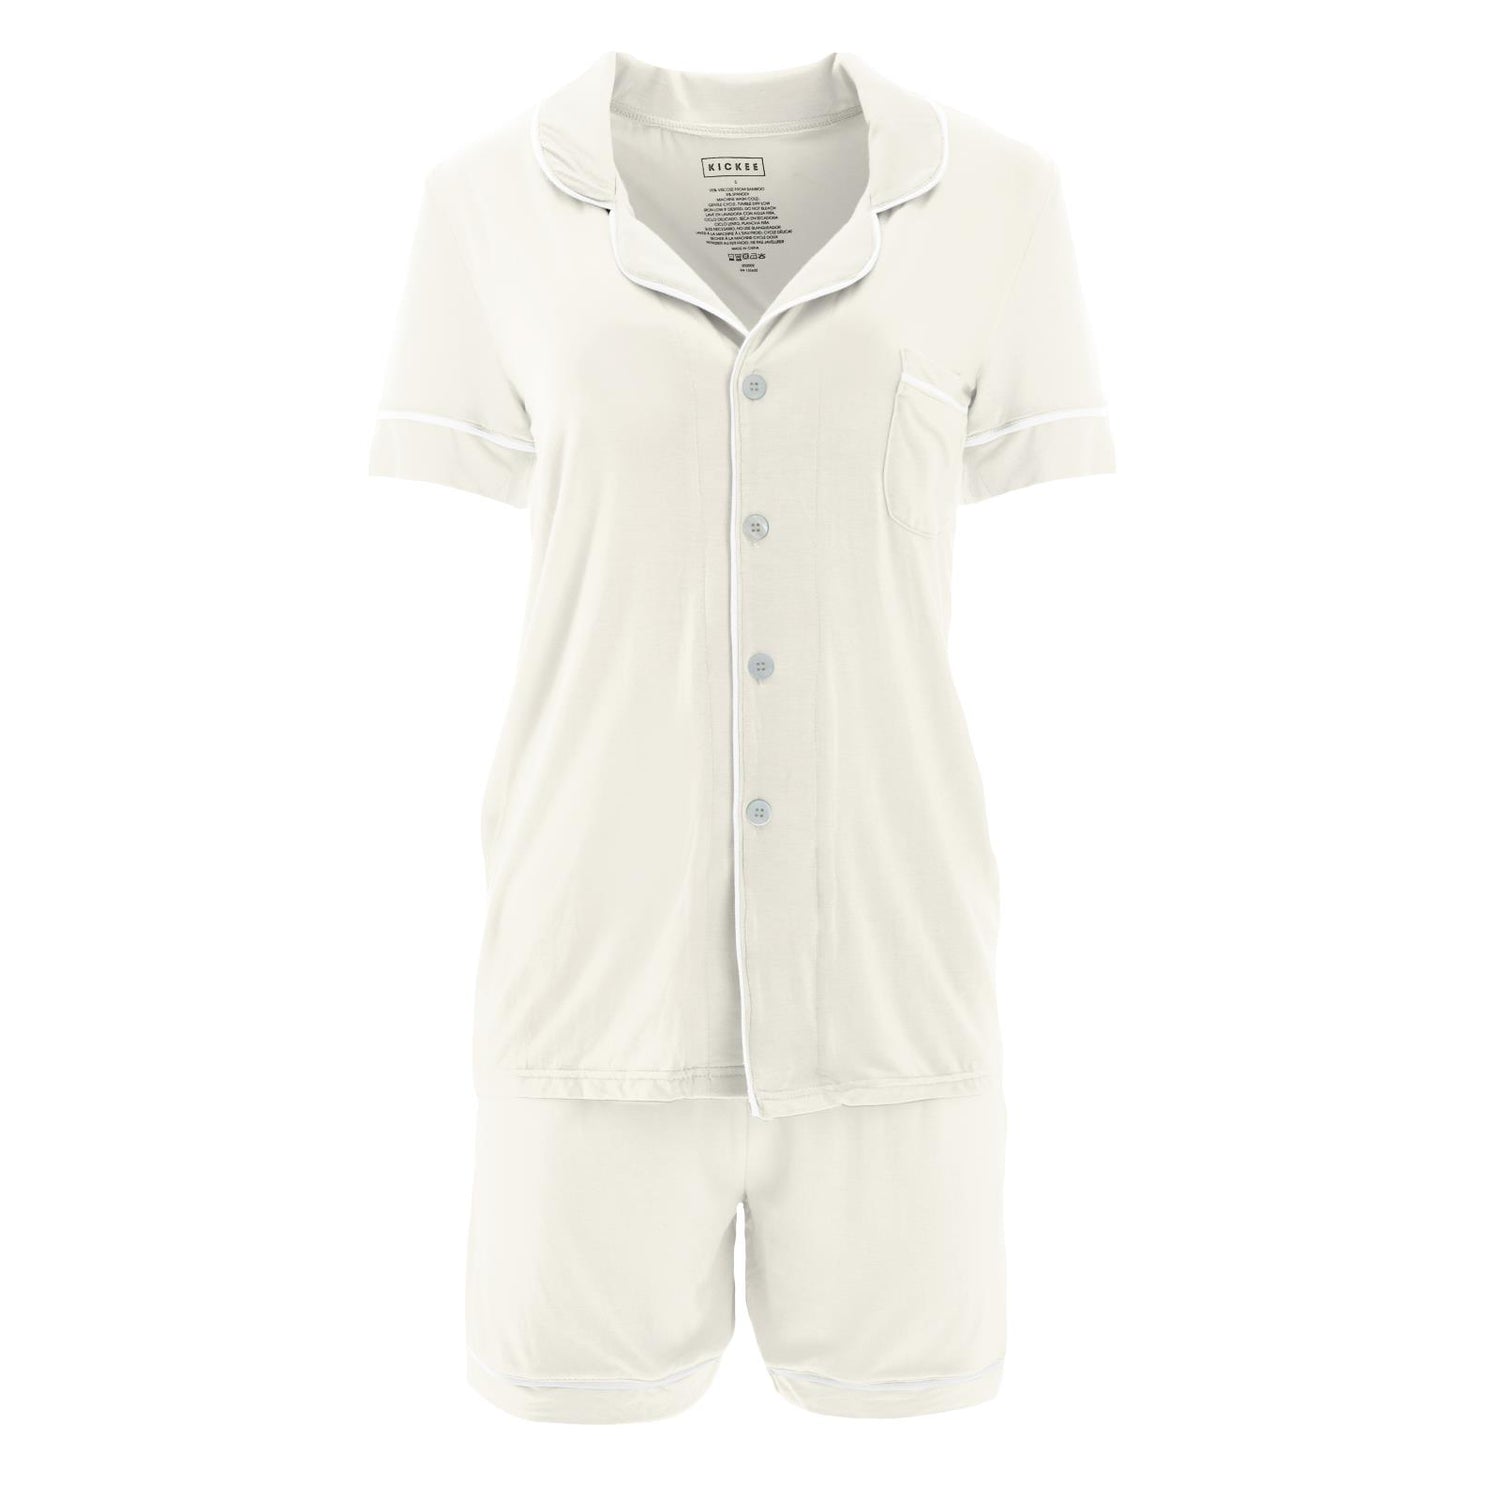 Women's Short Sleeve Collared Pajama Set with Shorts in Natural